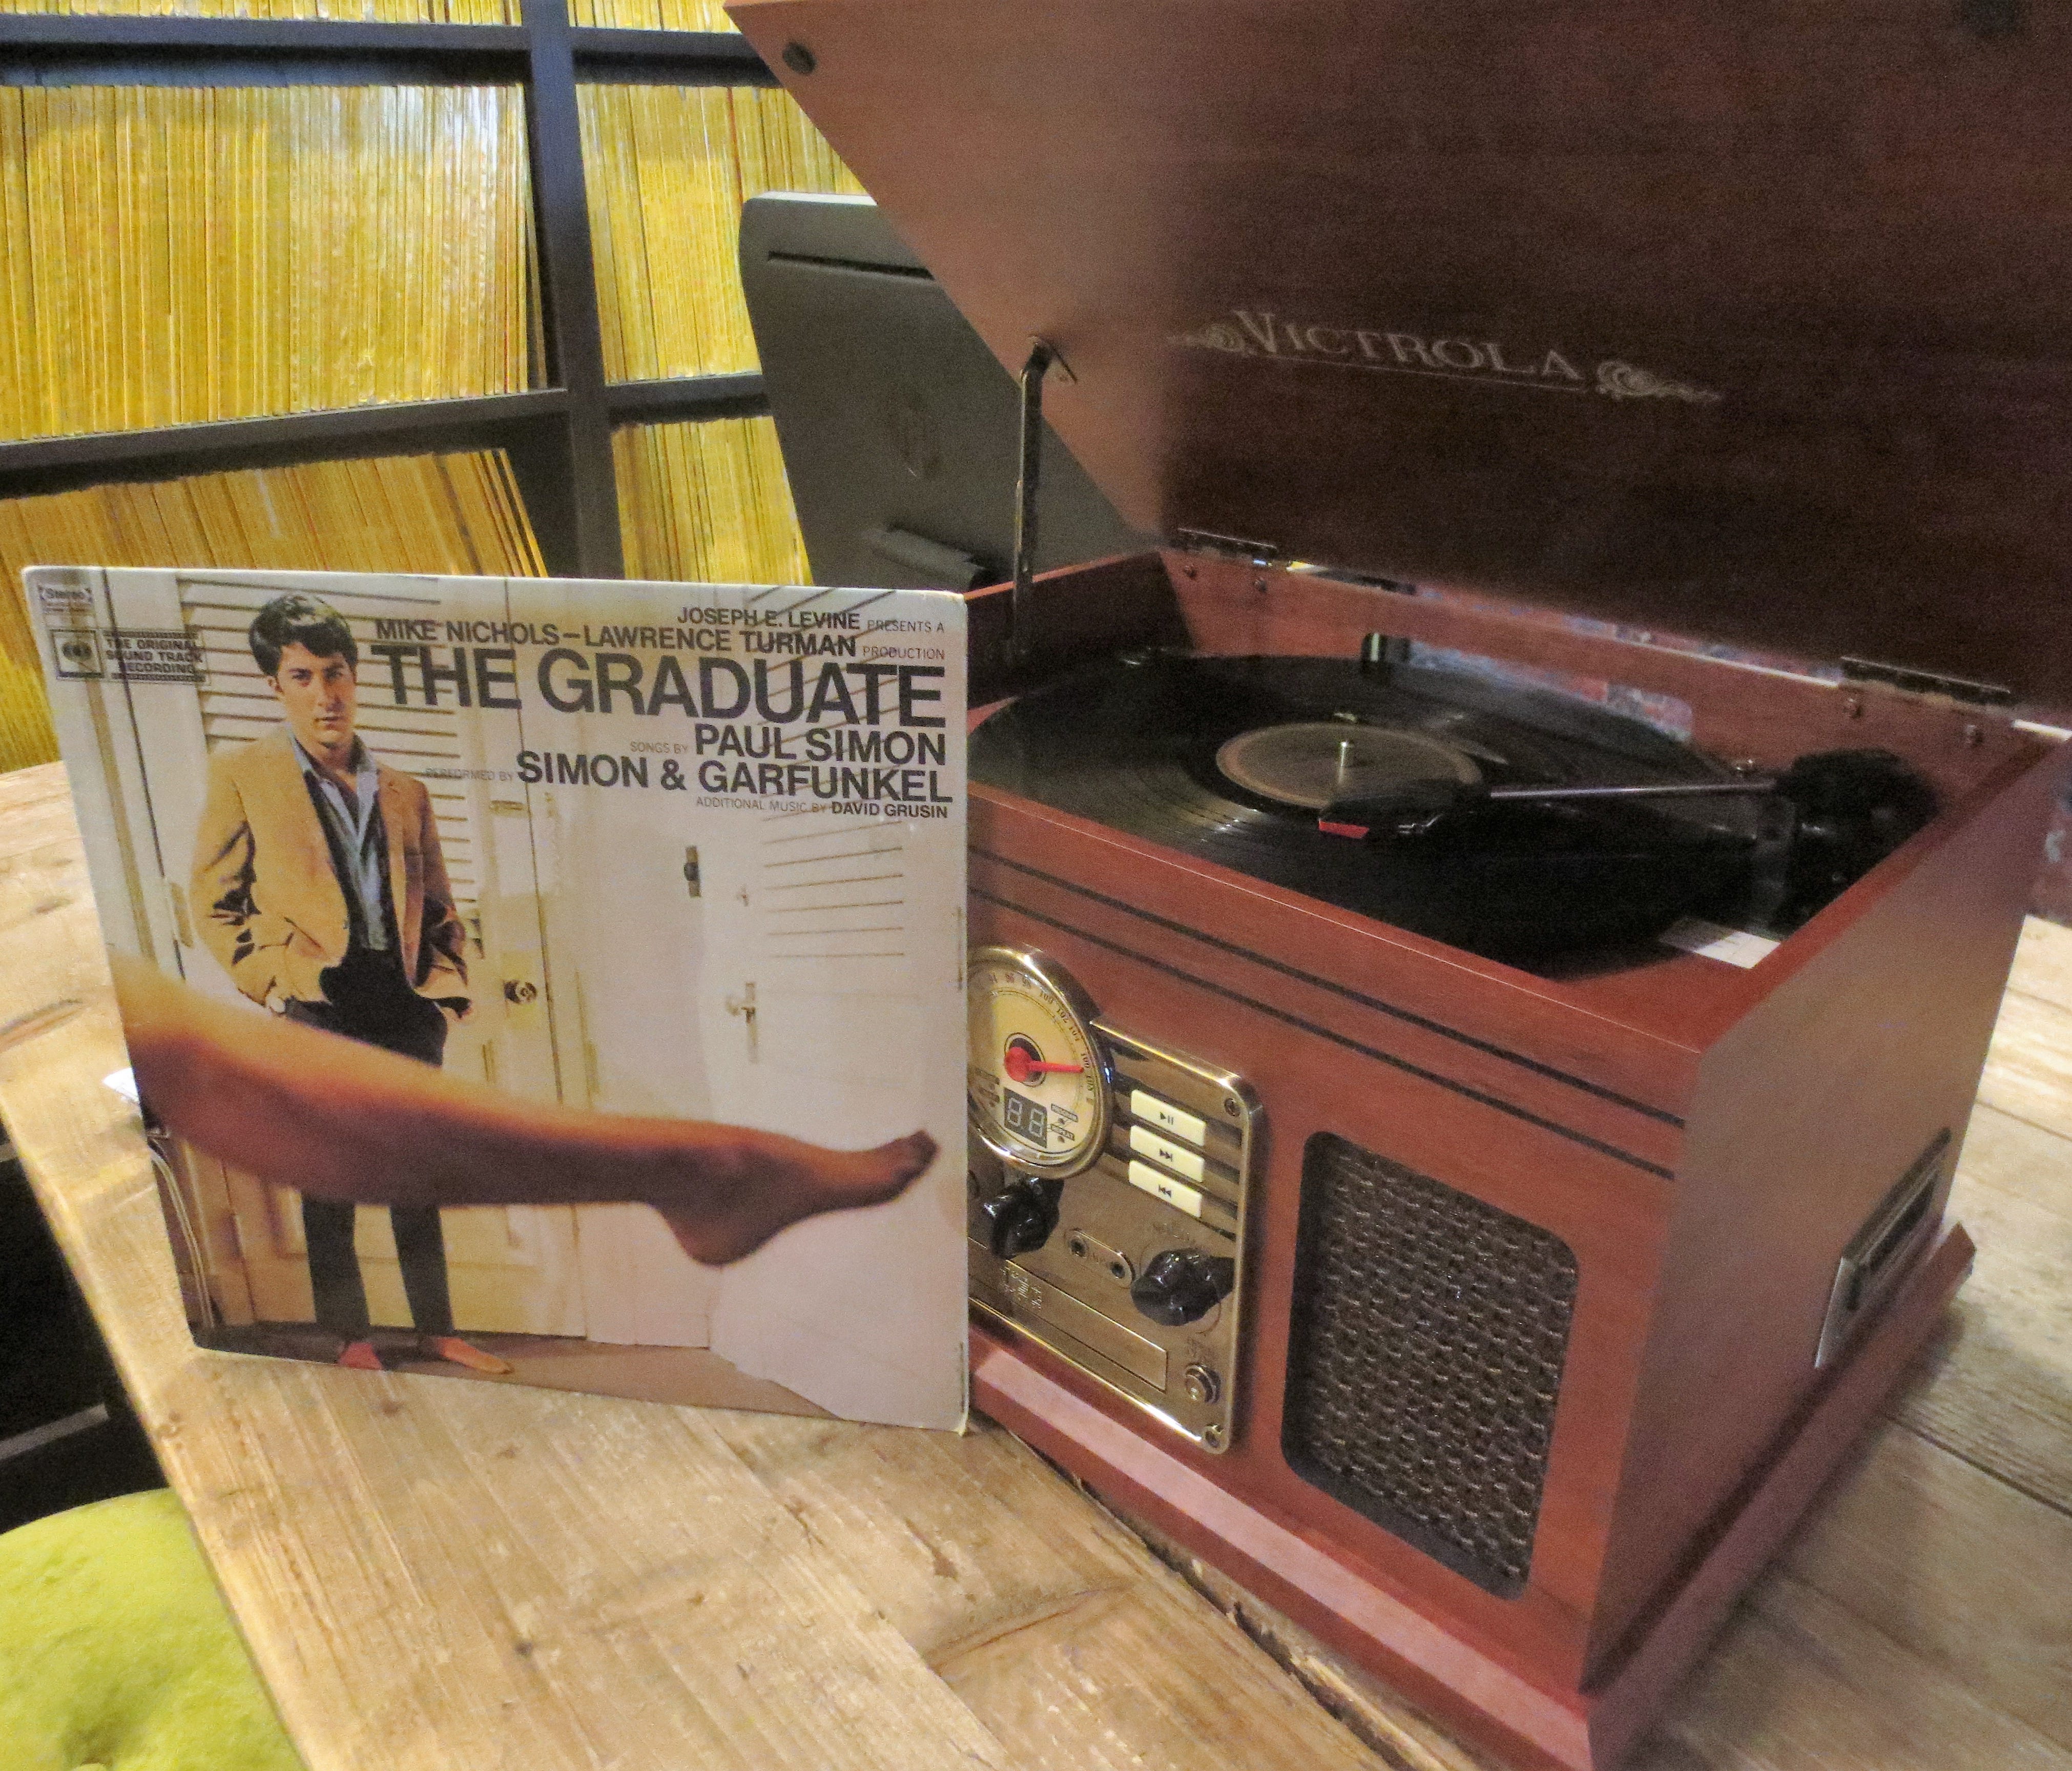 The Graduate Hotel Berkeley has periodic vinyl nights in which albums like 